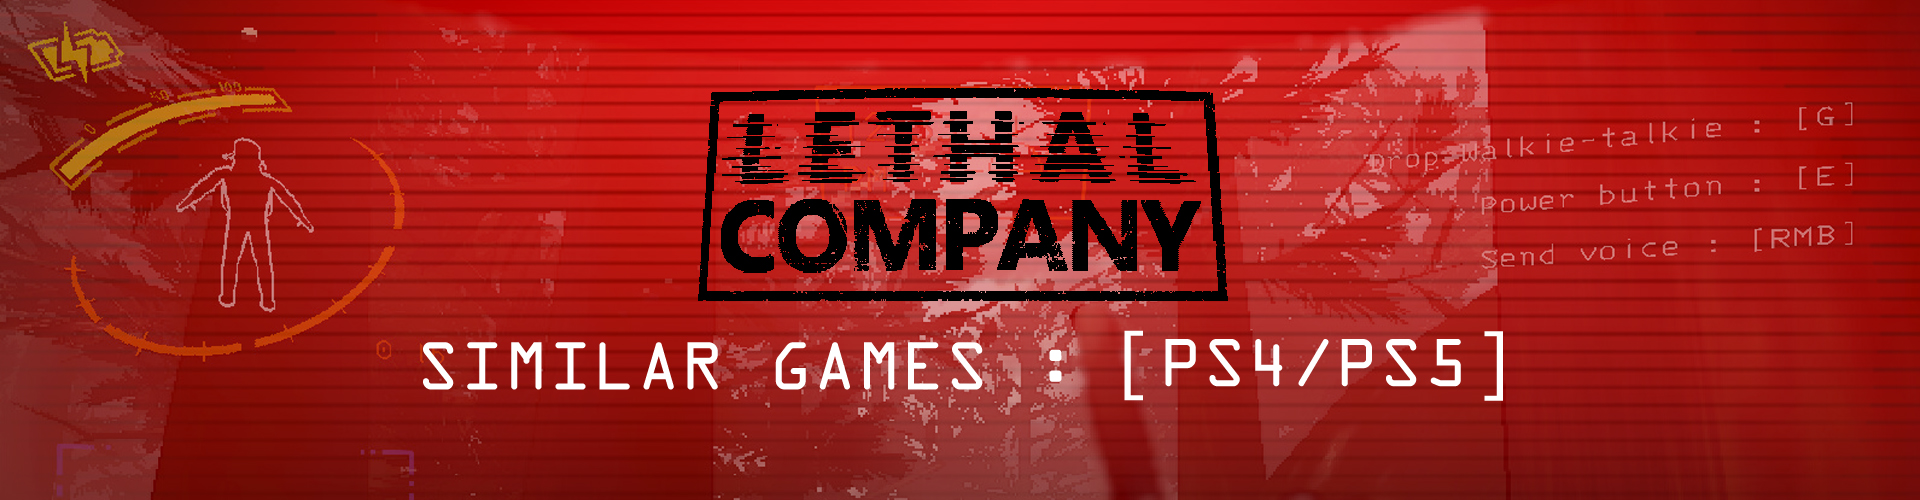 Die Top-Spiele Wie Lethal Company für PS4/PS5